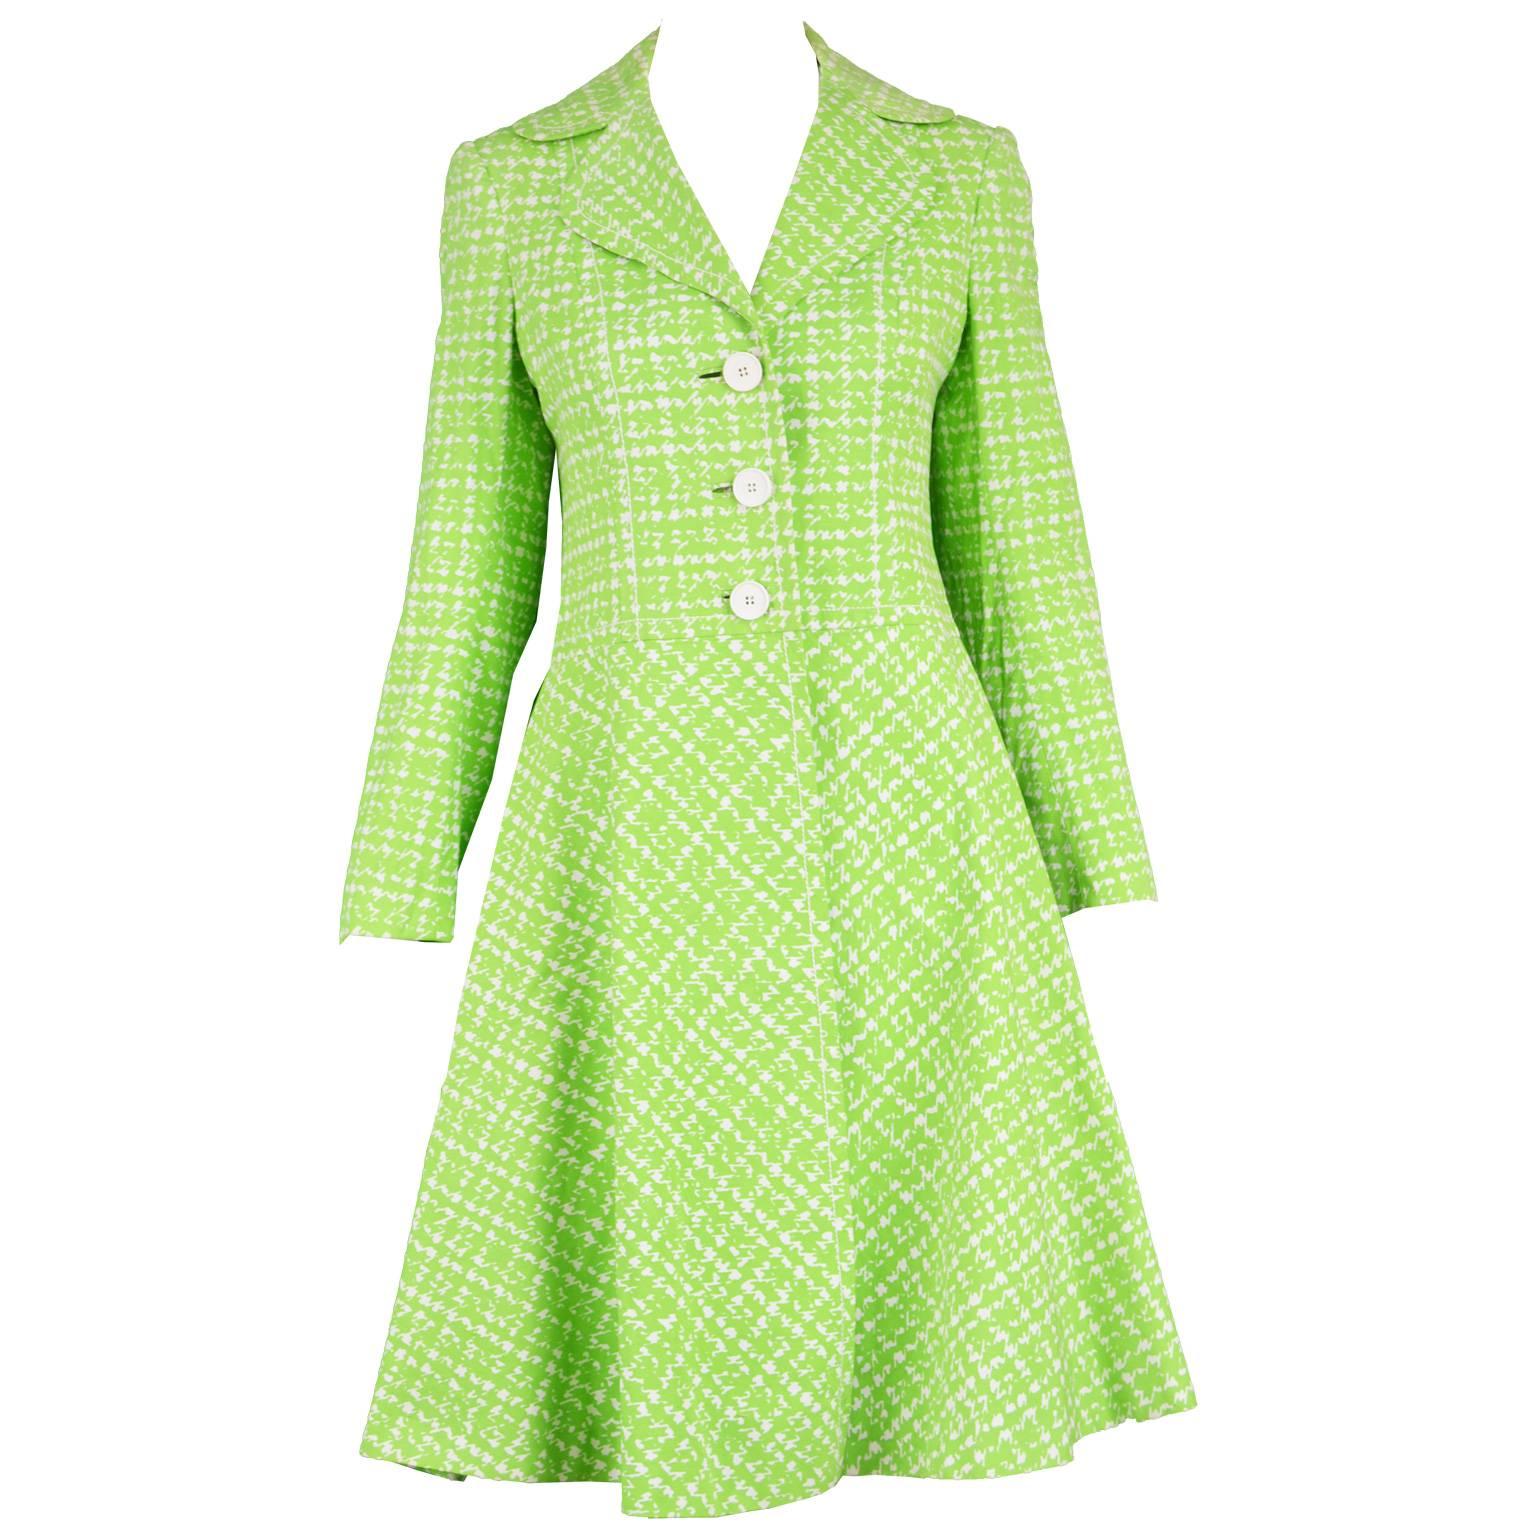 Diorling by Christian Dior London Vintage Green & White Cotton Mod Coat, 1960s